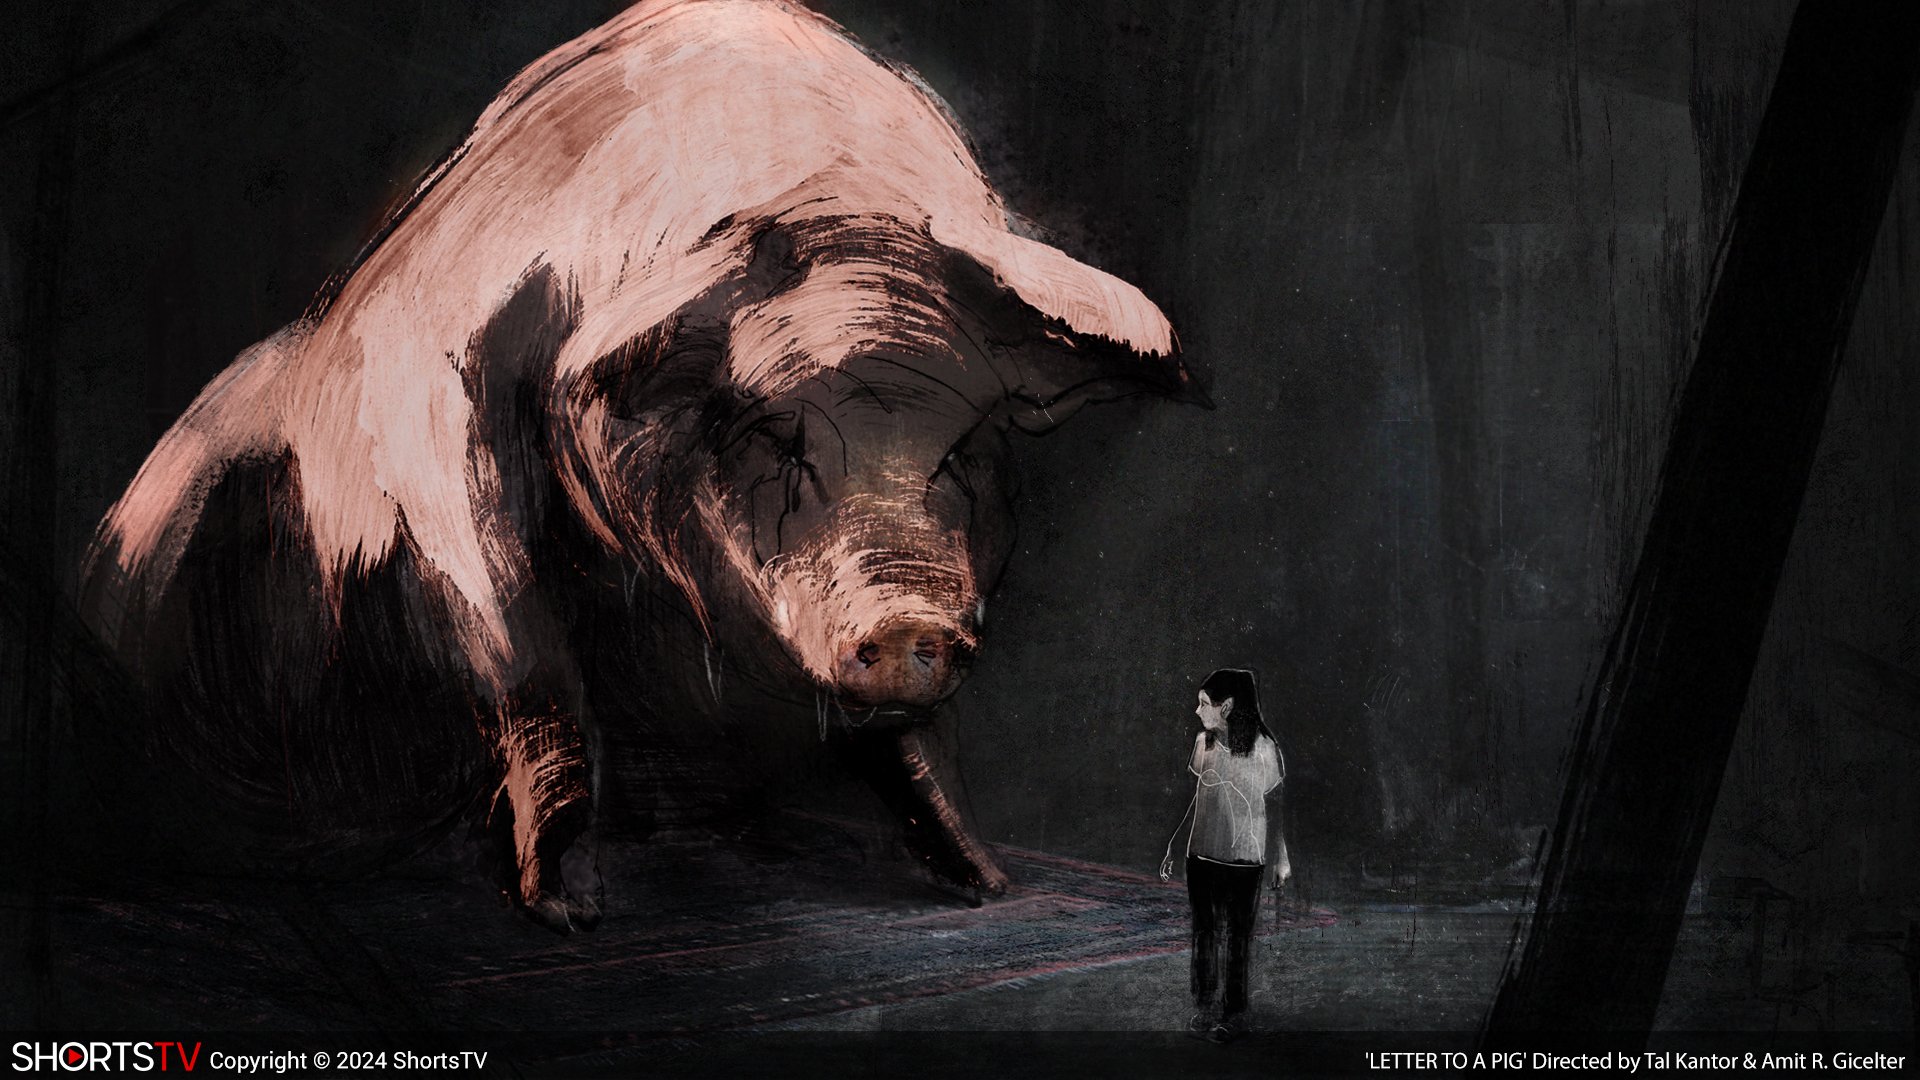 Letter to a Pig – Tal Kantor and Amit R. Gicelter, 17 min., France/Israel (in Hebrew)